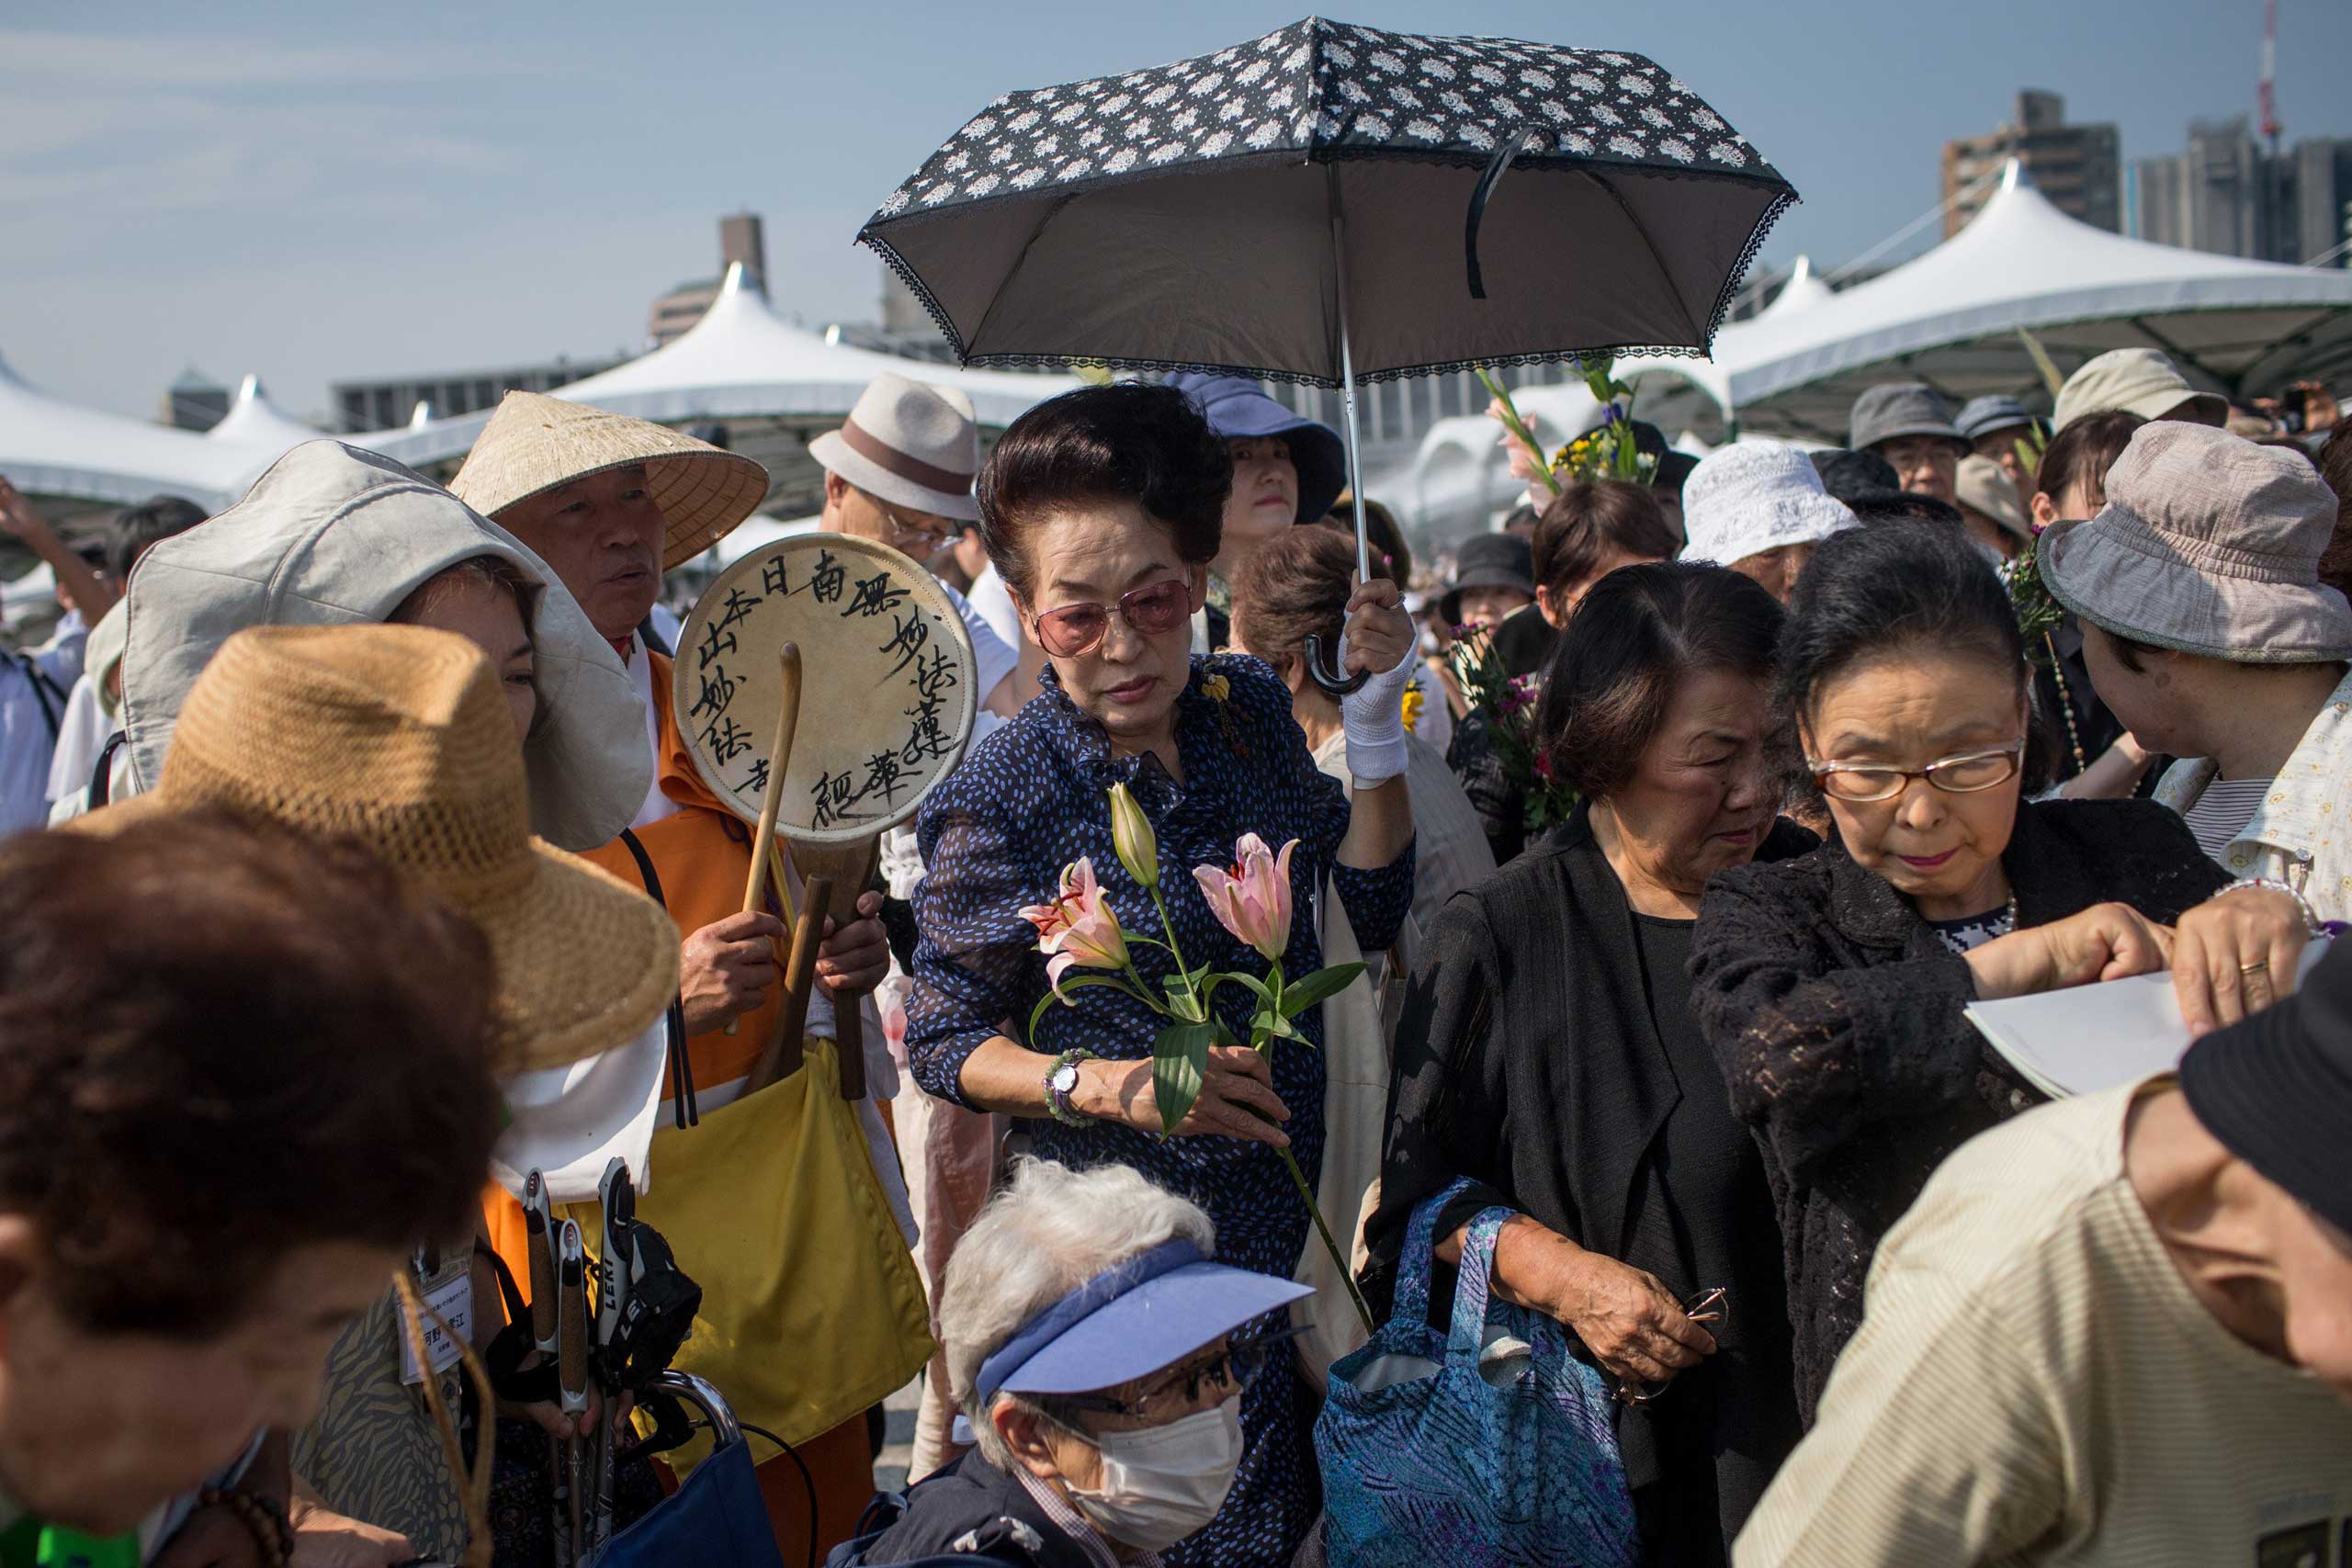 People crowd around to lay flowers at the Hiroshima Peace Memorial after the 70th anniversary ceremony of the atomic bombing of Hiroshima at the Hiroshima Peace Memorial Park, on  on Aug. 6, 2015.